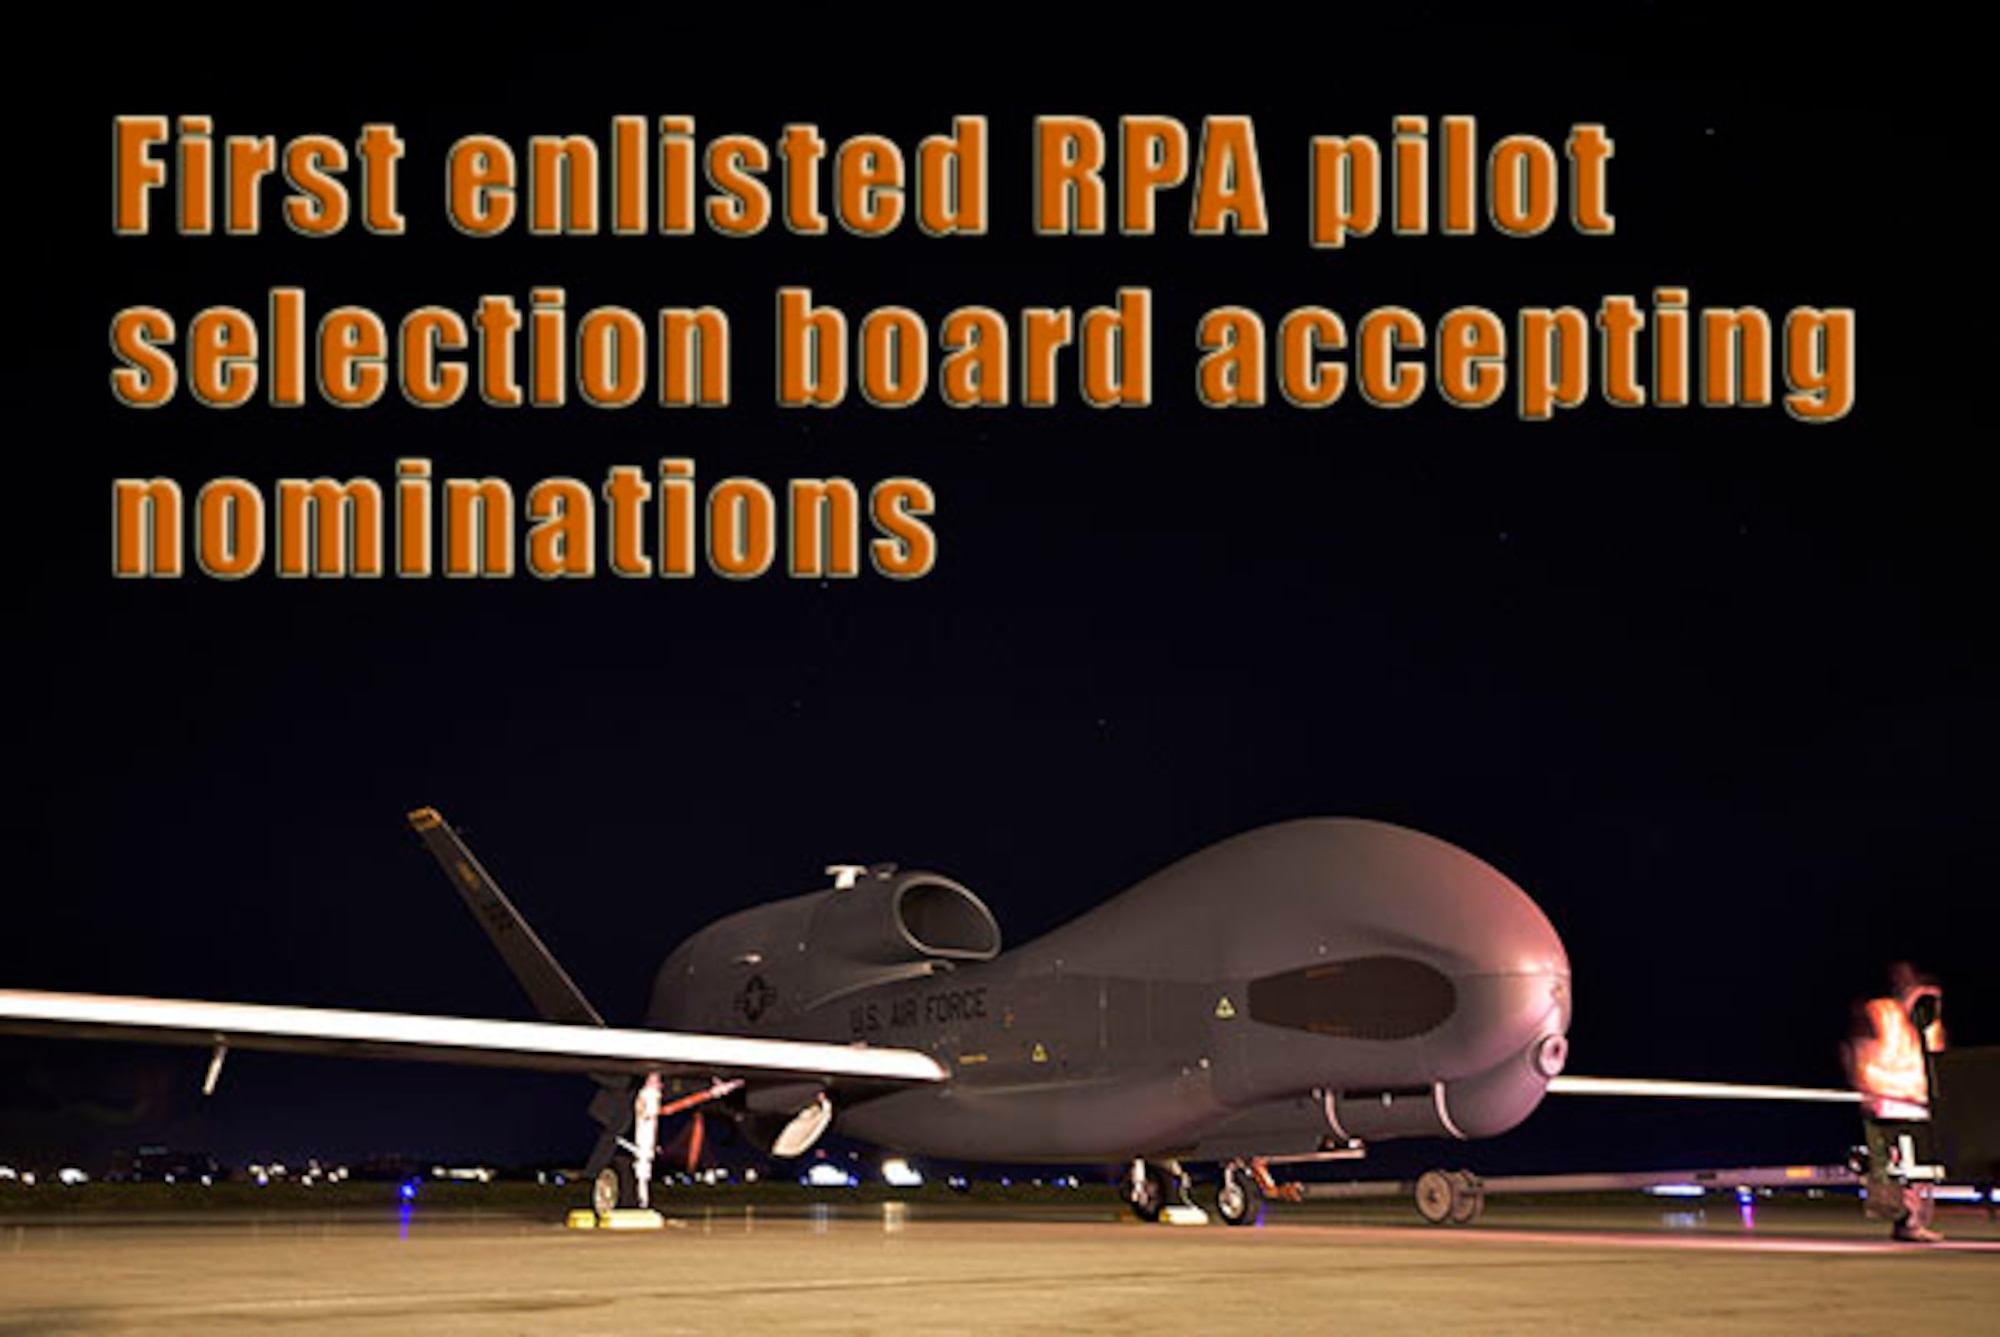 The Air Force has plans to integrate enlisted pilots into RQ-4 Global Hawk flying operations, placing highly capable enlisted forces in a position to support the future threat environment. The call for nominations is open and the first selection board for enlisted remotely piloted aircraft pilots will convene at AFPC in November. (AFPC courtesy graphic)